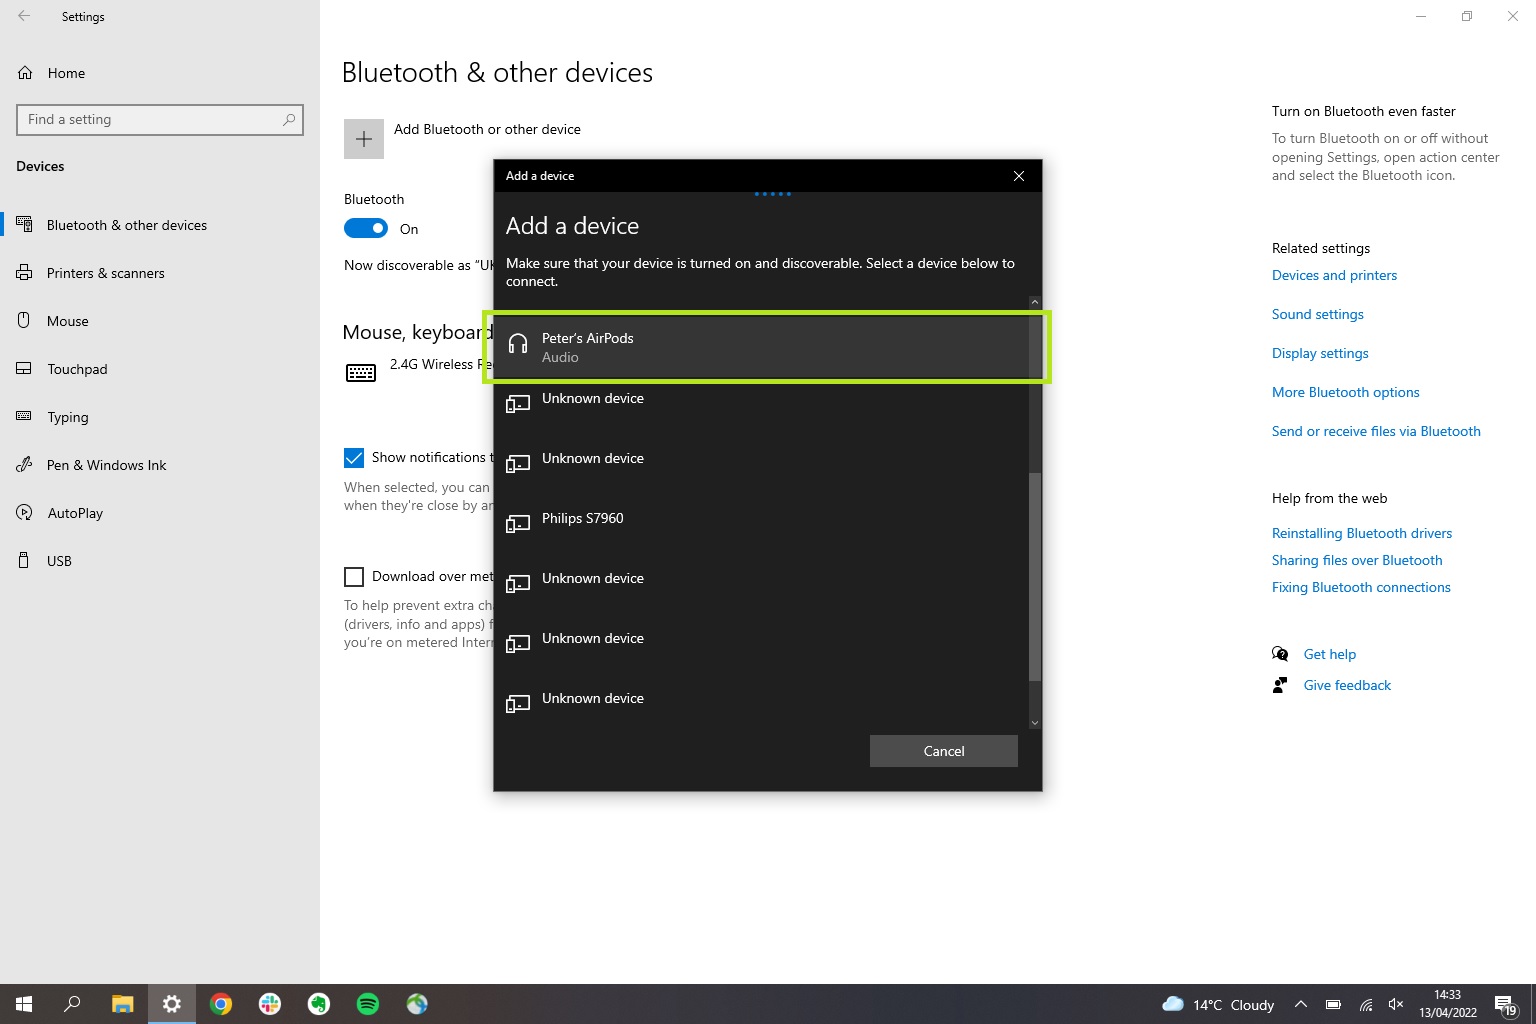 A screenshot showing Windows 10's Bluetooth device pairing list, showing how to connect AirPods to a PC